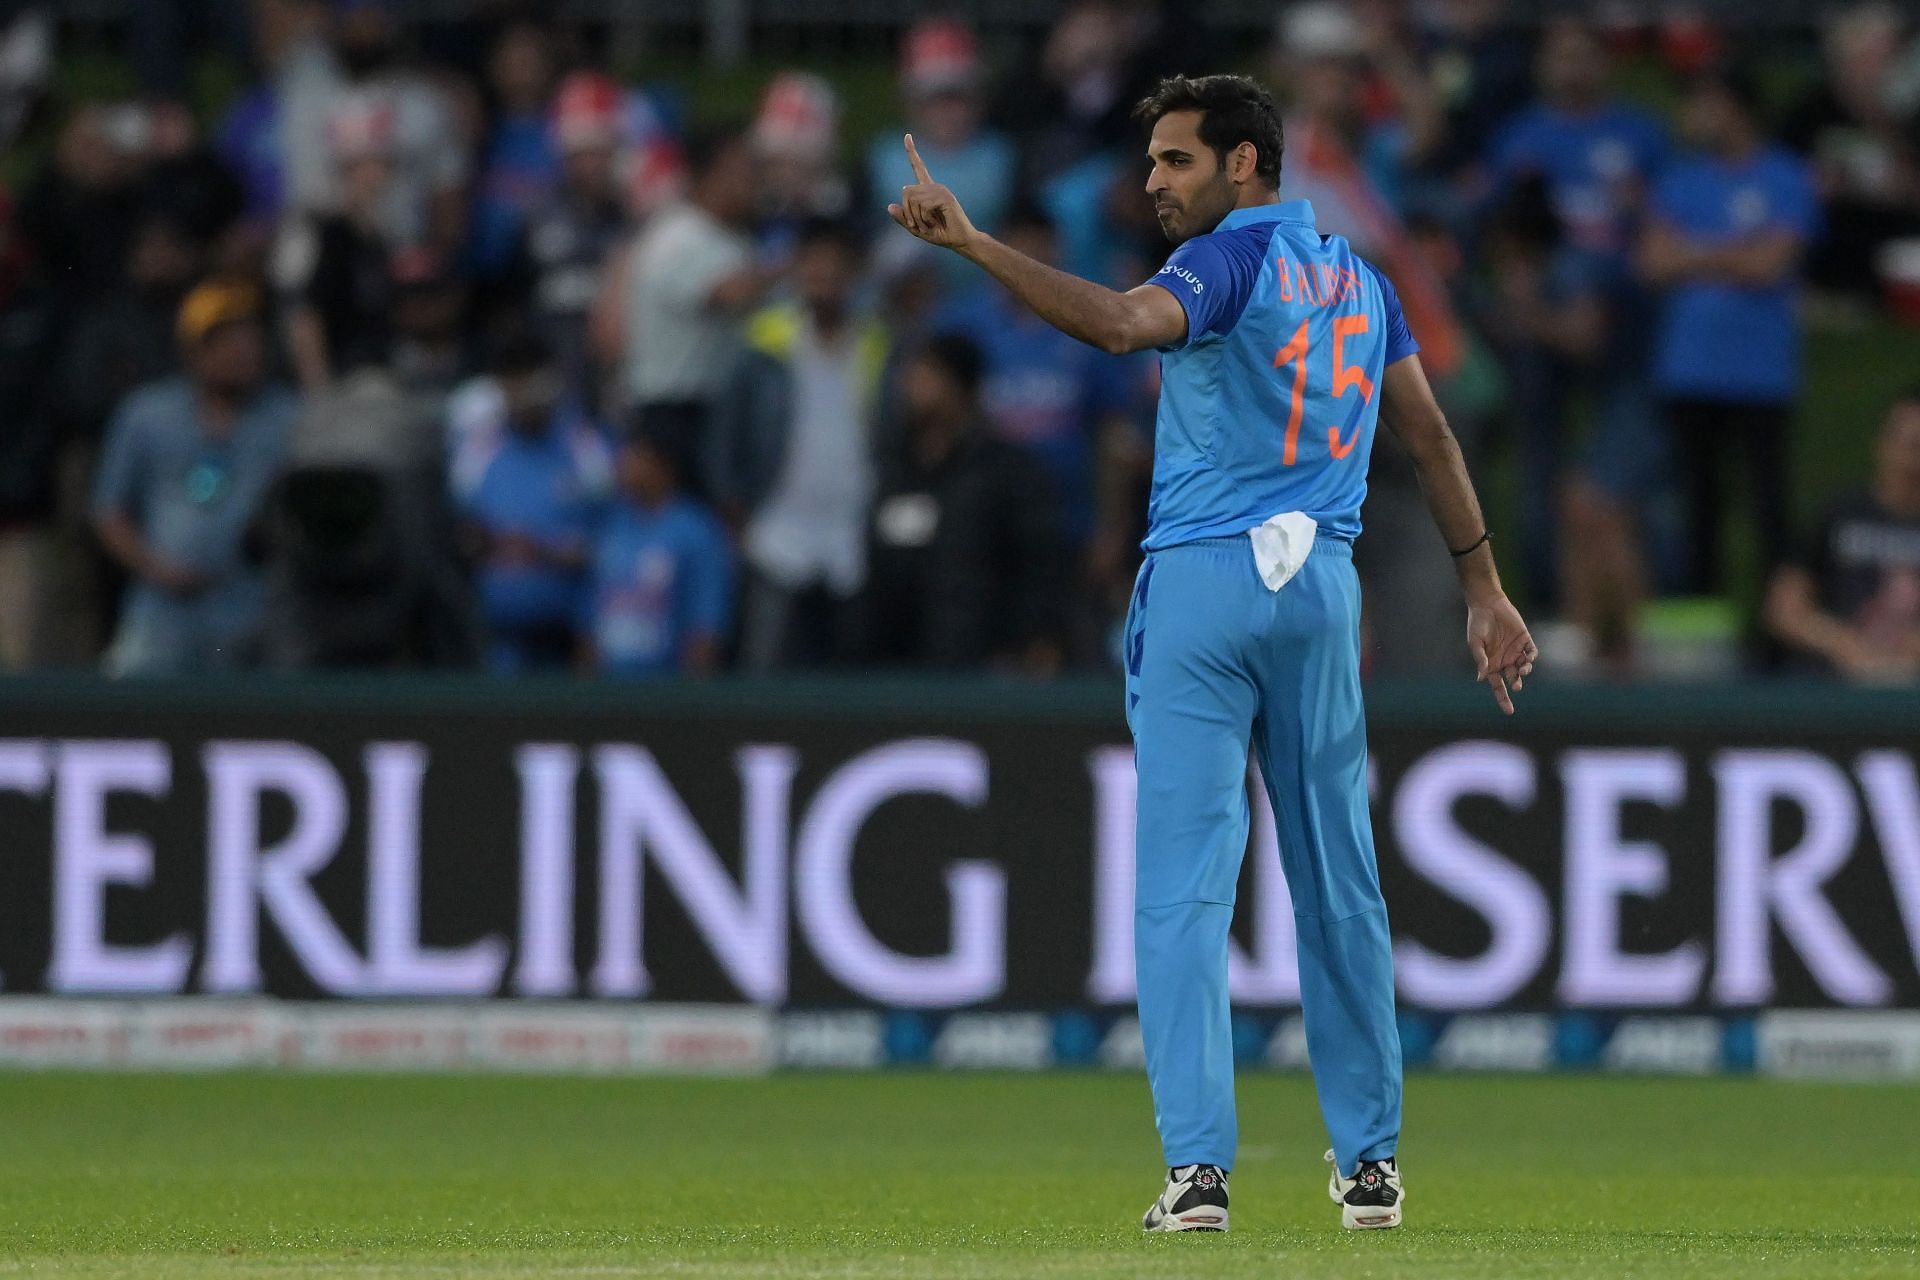 Bhuvneshwar Kumar picked up one wicket in the seven overs he bowled.